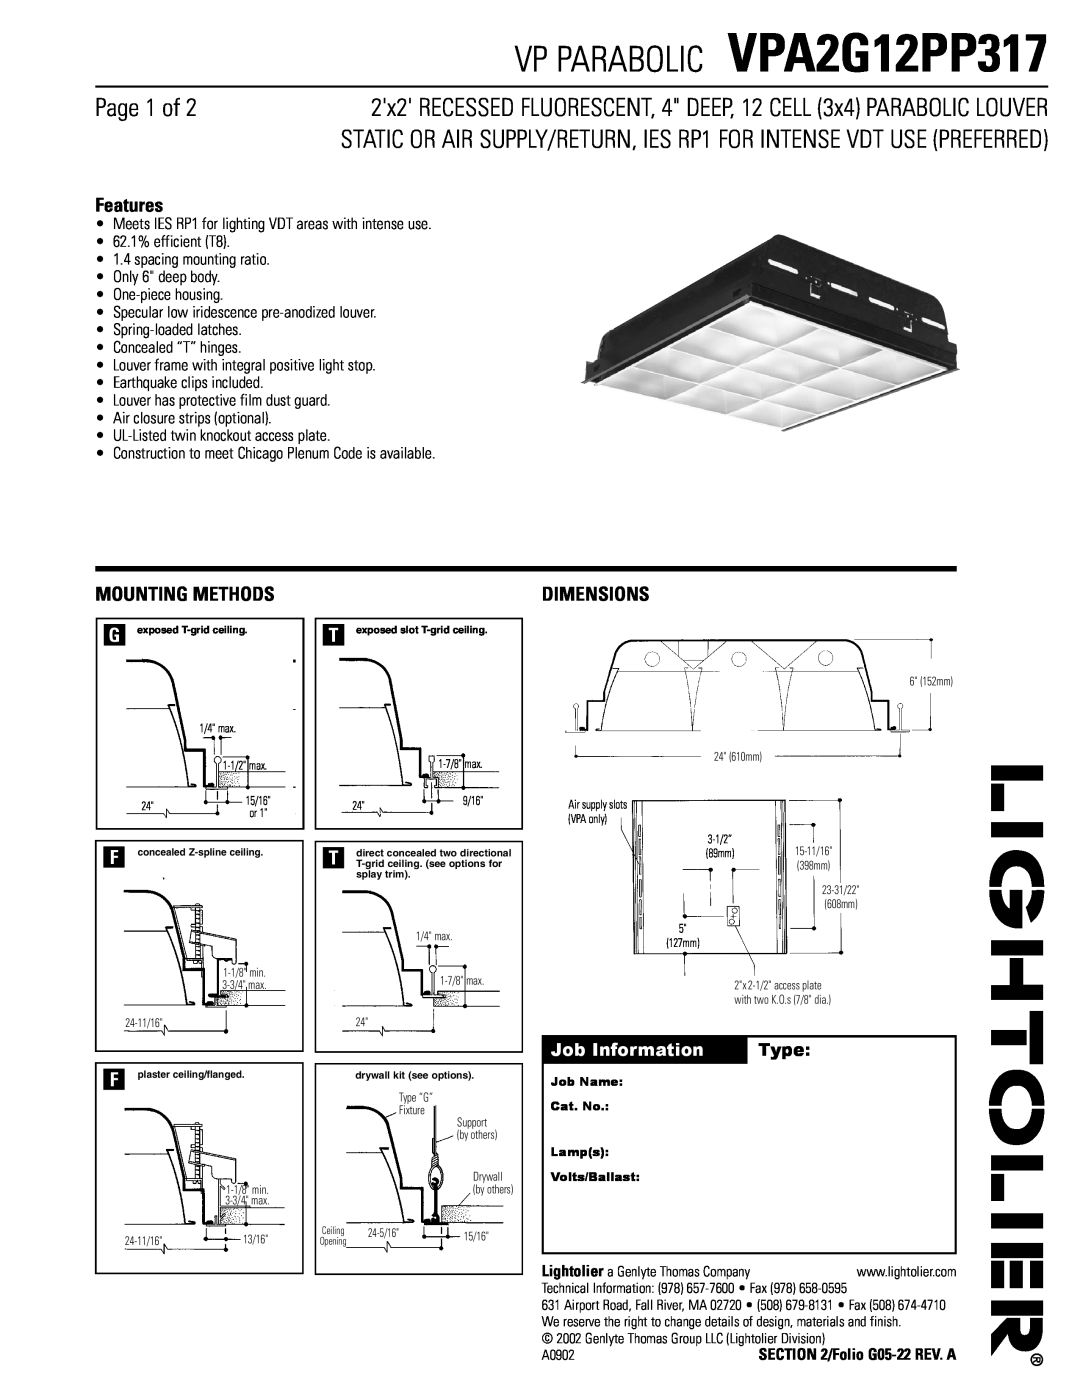 Lightolier dimensions VP PARABOLIC VPA2G12PP317, Page 1 of, Features, Mounting Methods, Dimensions 